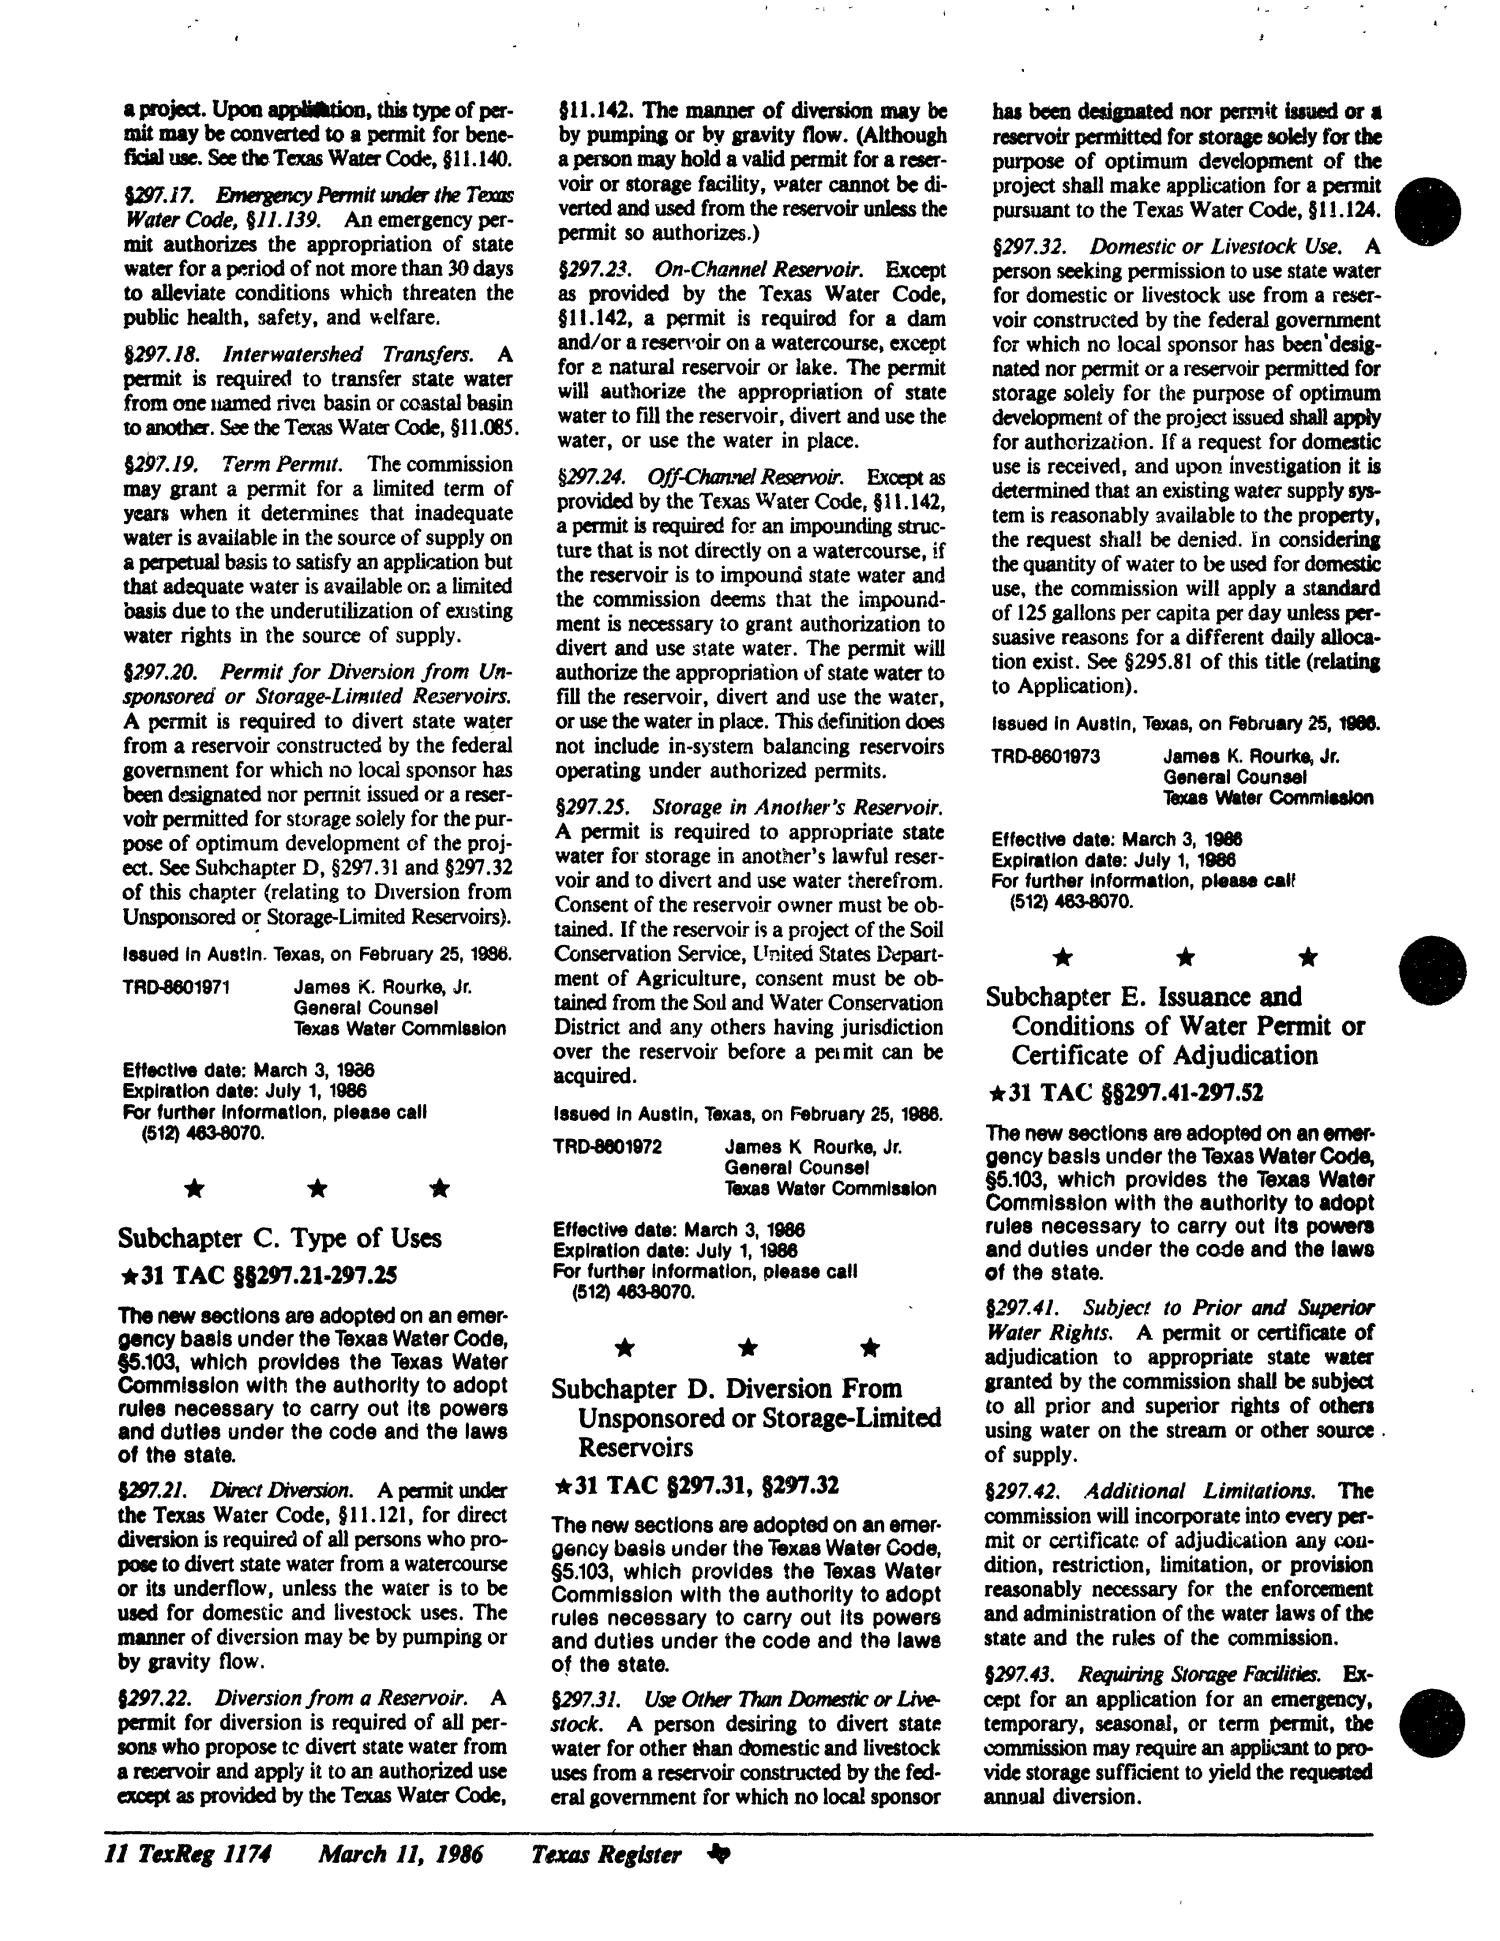 Texas Register, Volume 11, Number 19, Pages 1163-1244, March 11, 1986
                                                
                                                    1174
                                                